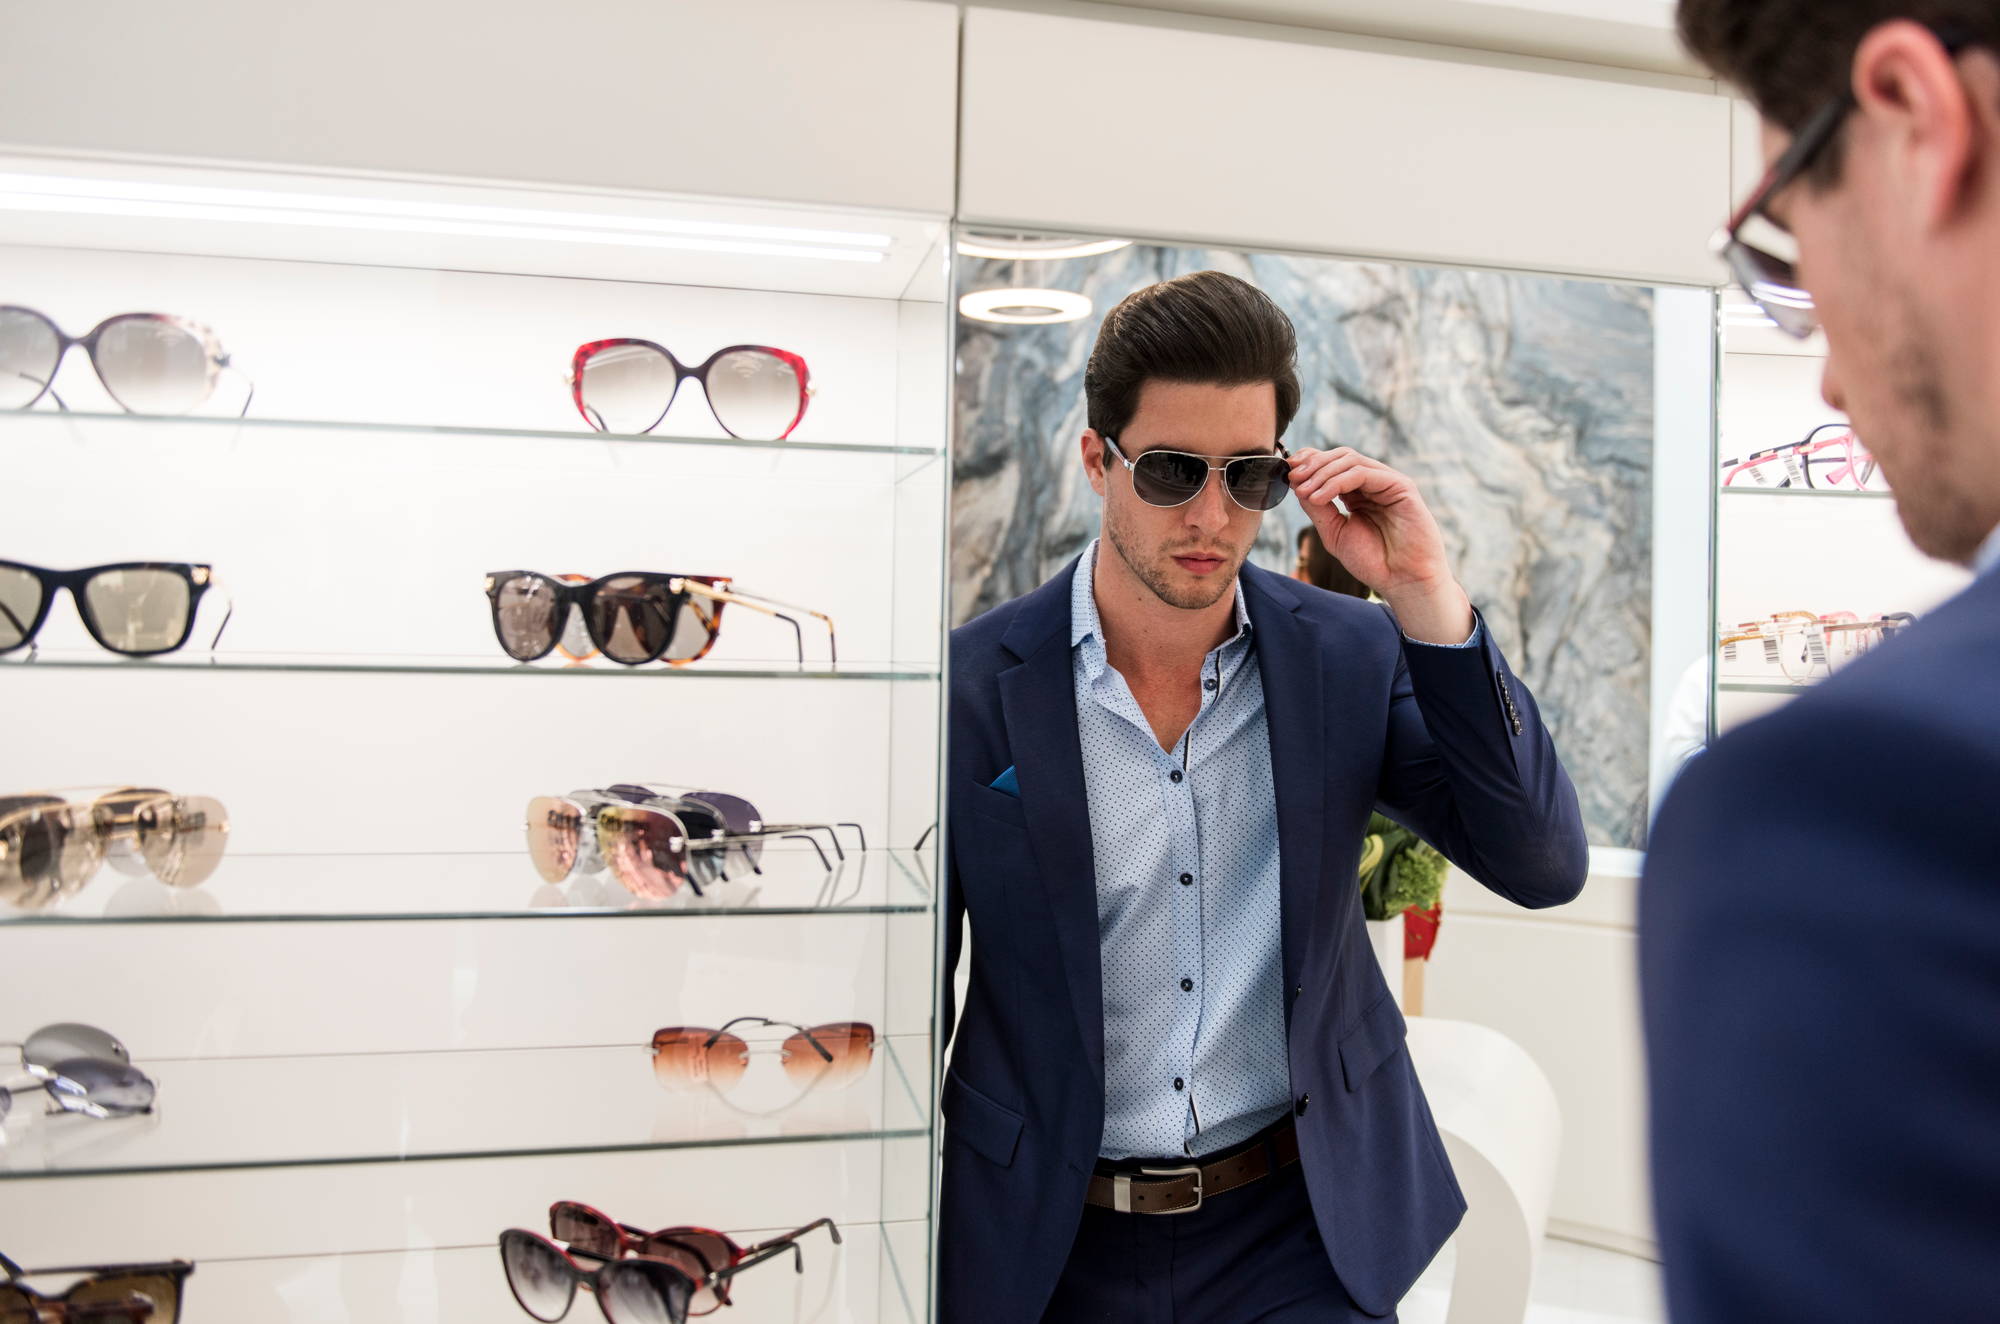 A man tries on sunglasses at Designer Eyes in Aventura Mall